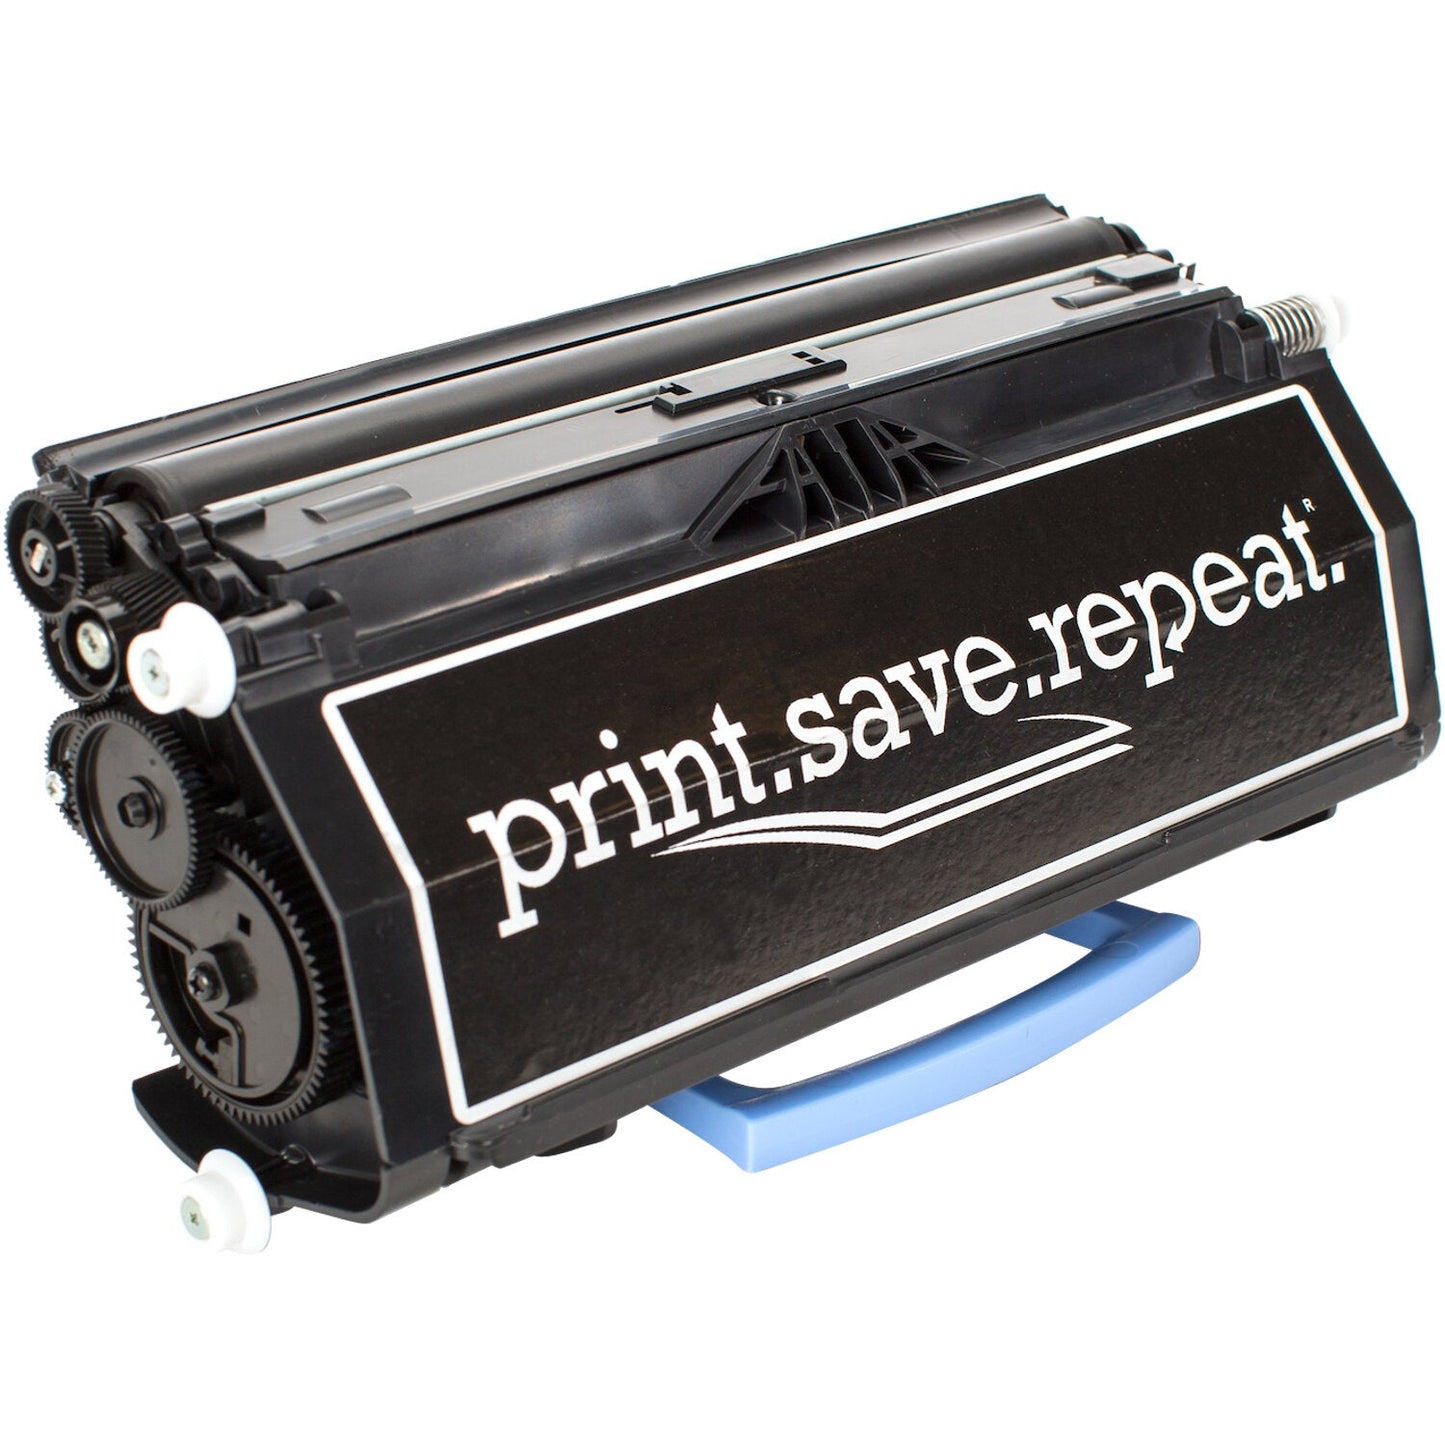 Print.Save.Repeat. Lexmark X463H21G High Yield Remanufactured Toner Cartridge for X463, X464, X466 [9,000 Pages]